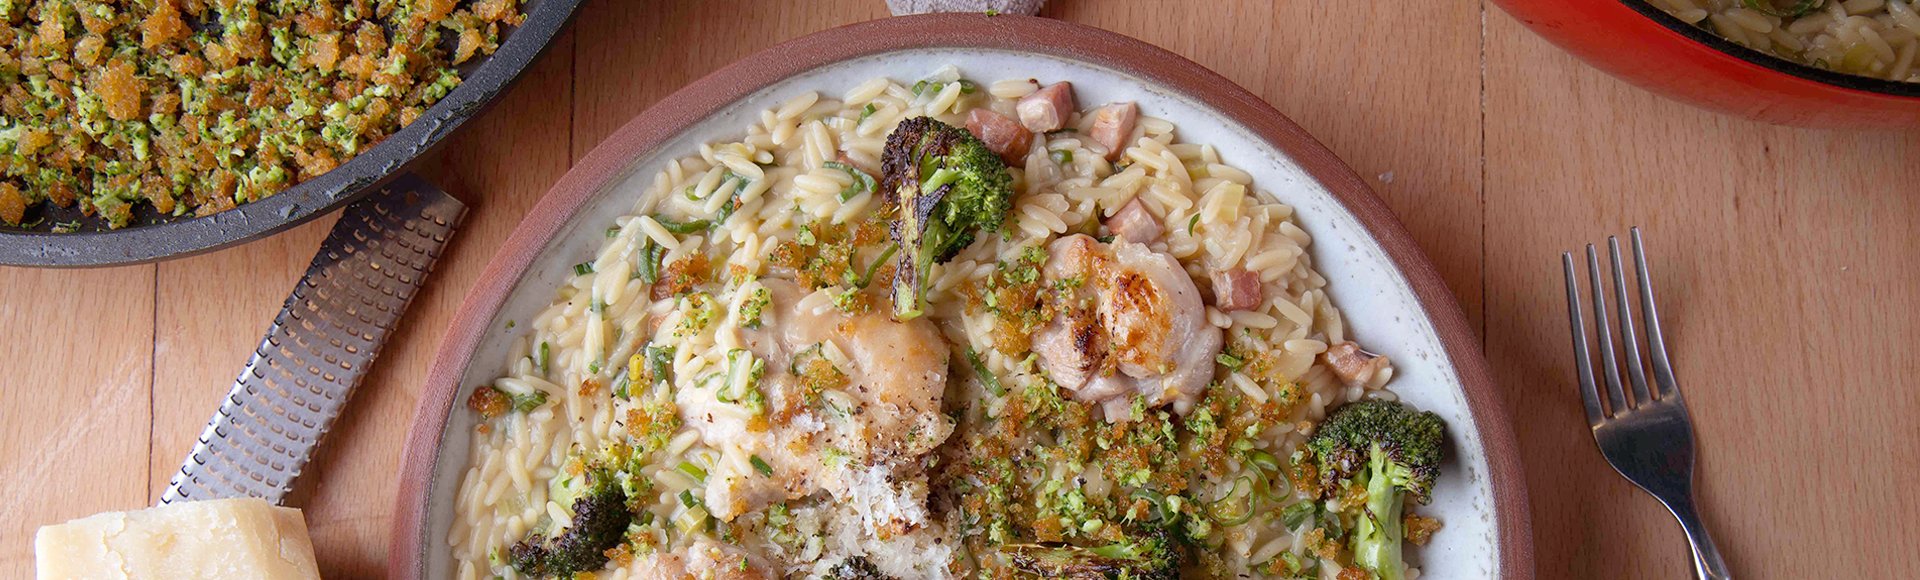 Orzotto with chicken, broccoli and bacon